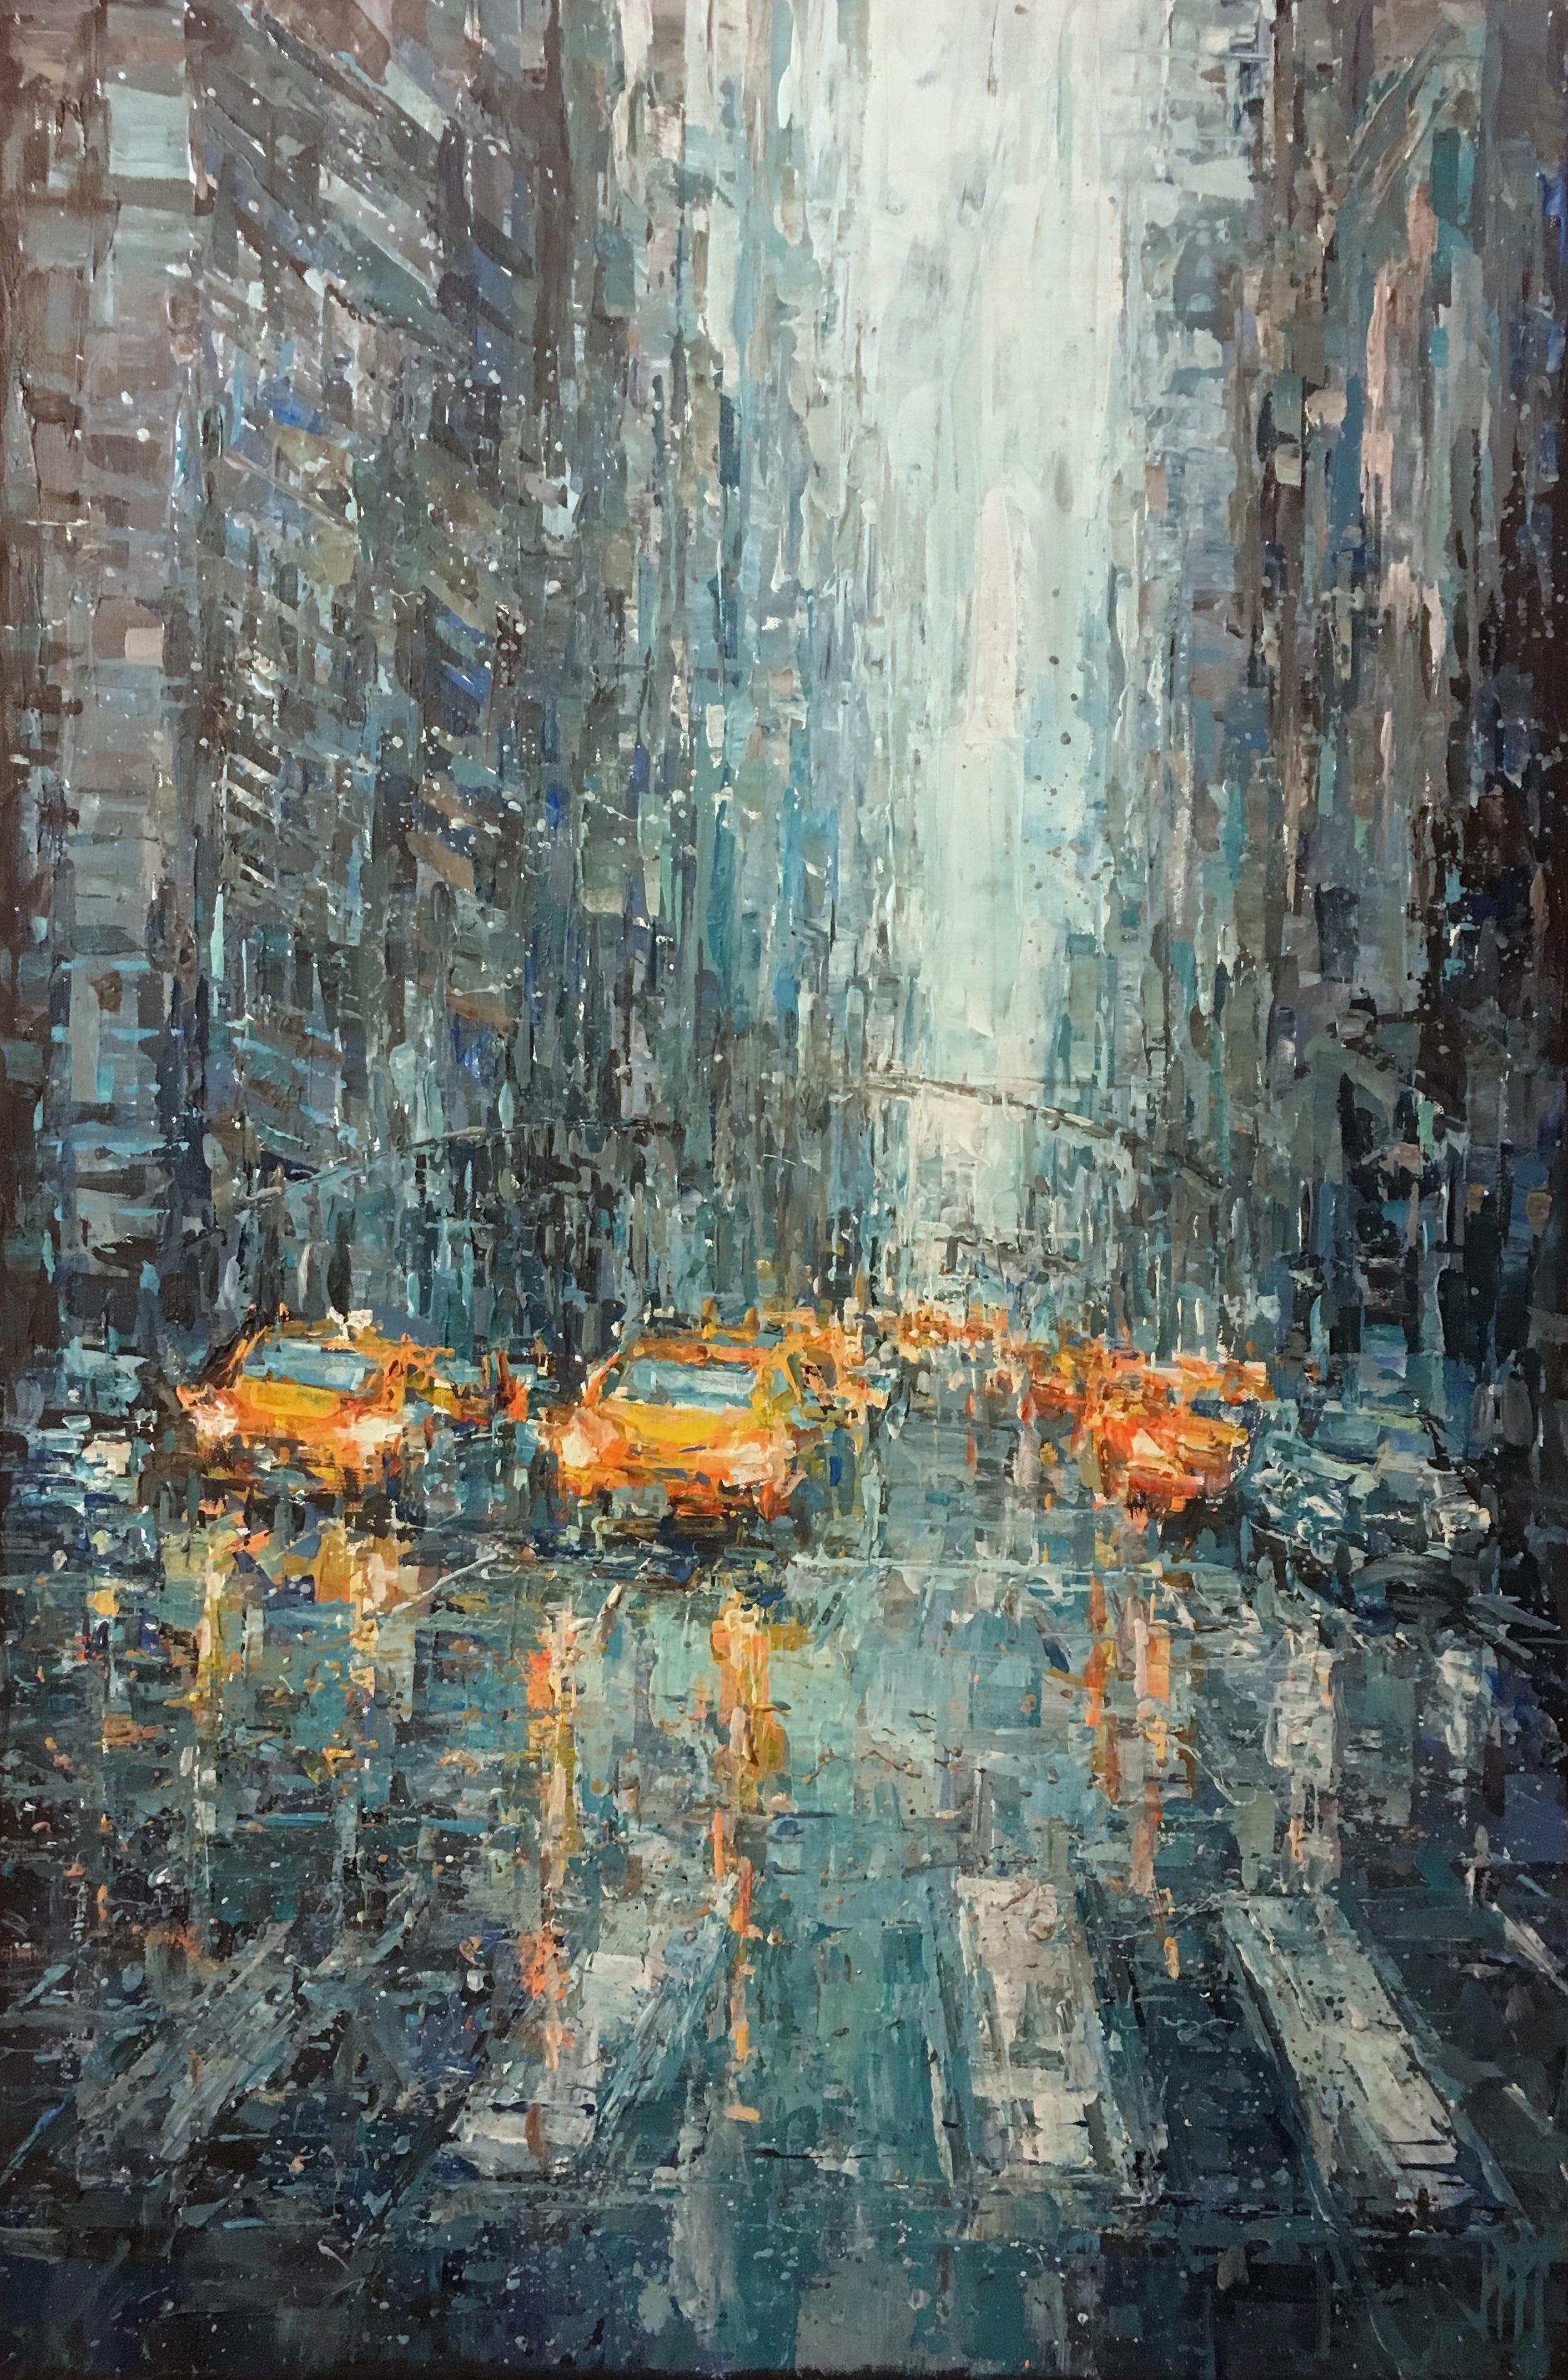 Painting I did of a New York intersection.